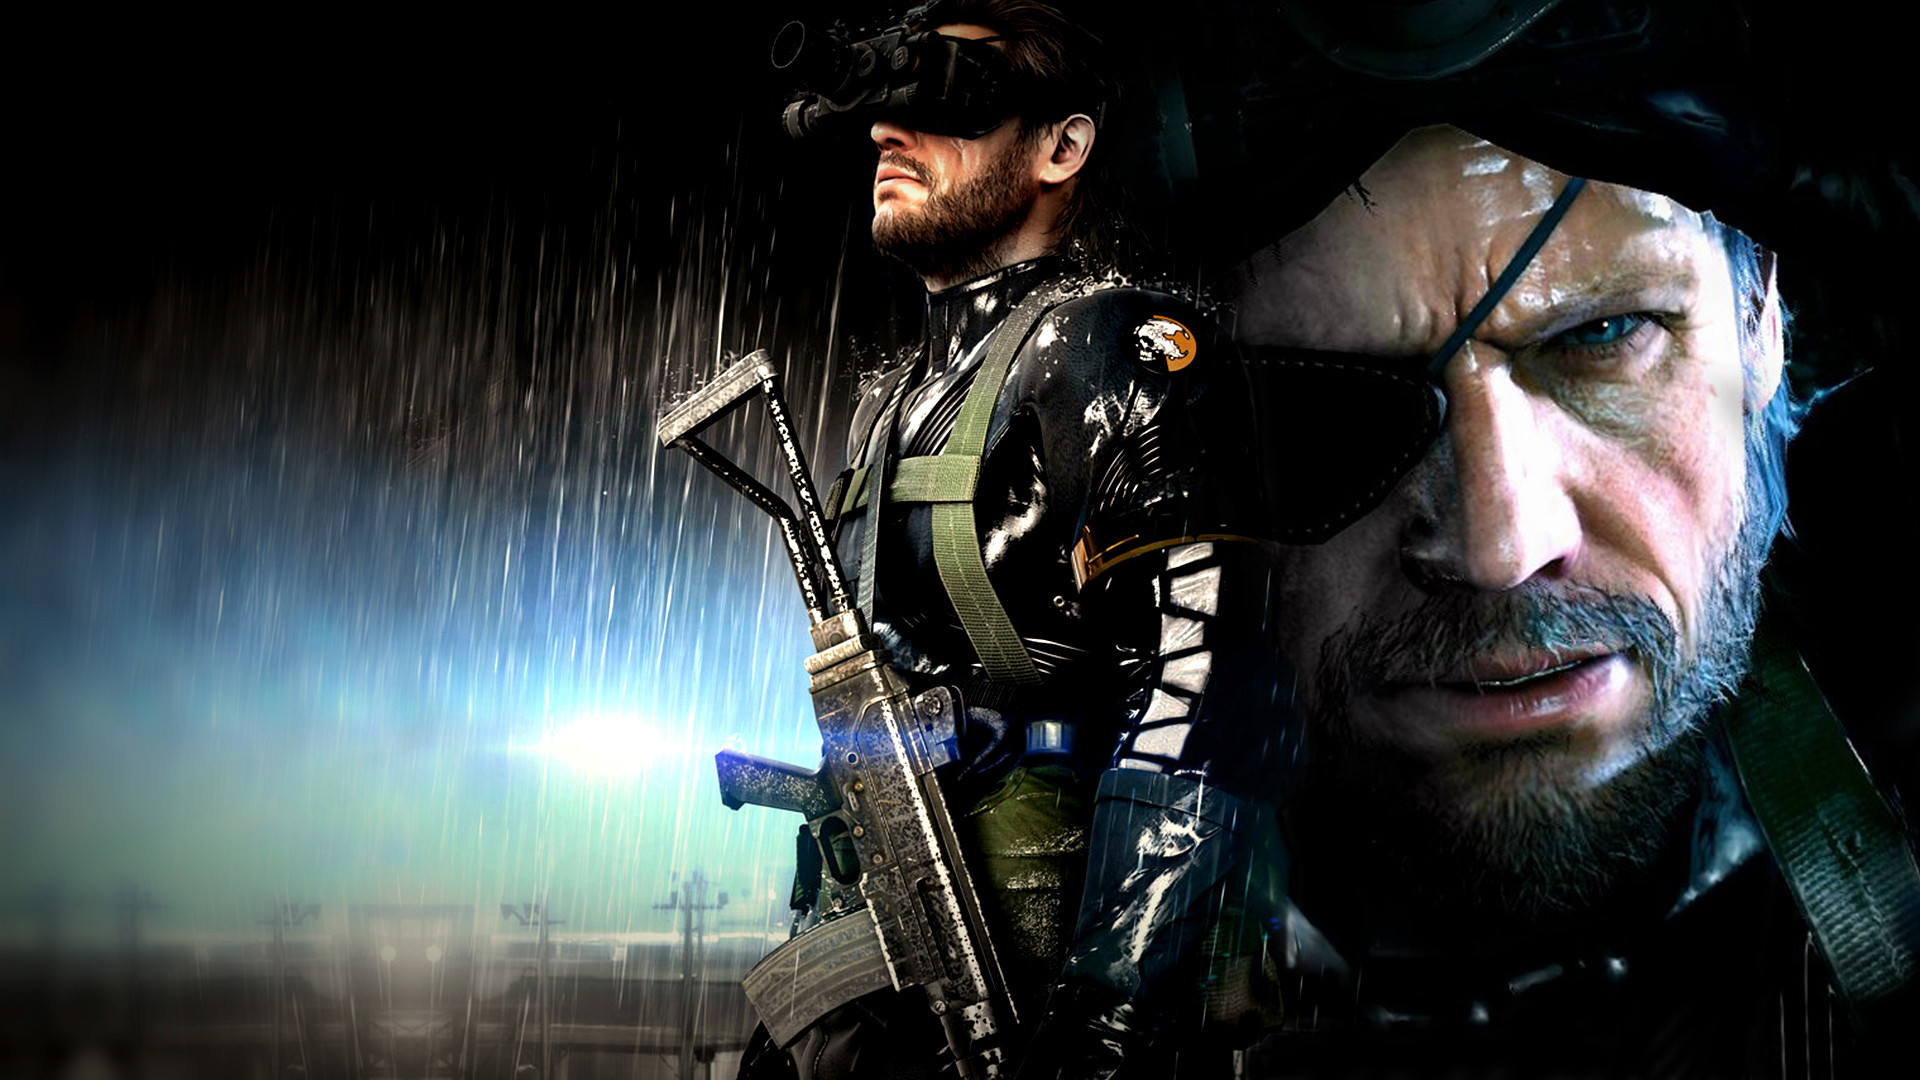 1920x1080 ... Metal Gear Solid V the Phantom Pain Wallpapers 86 pictures